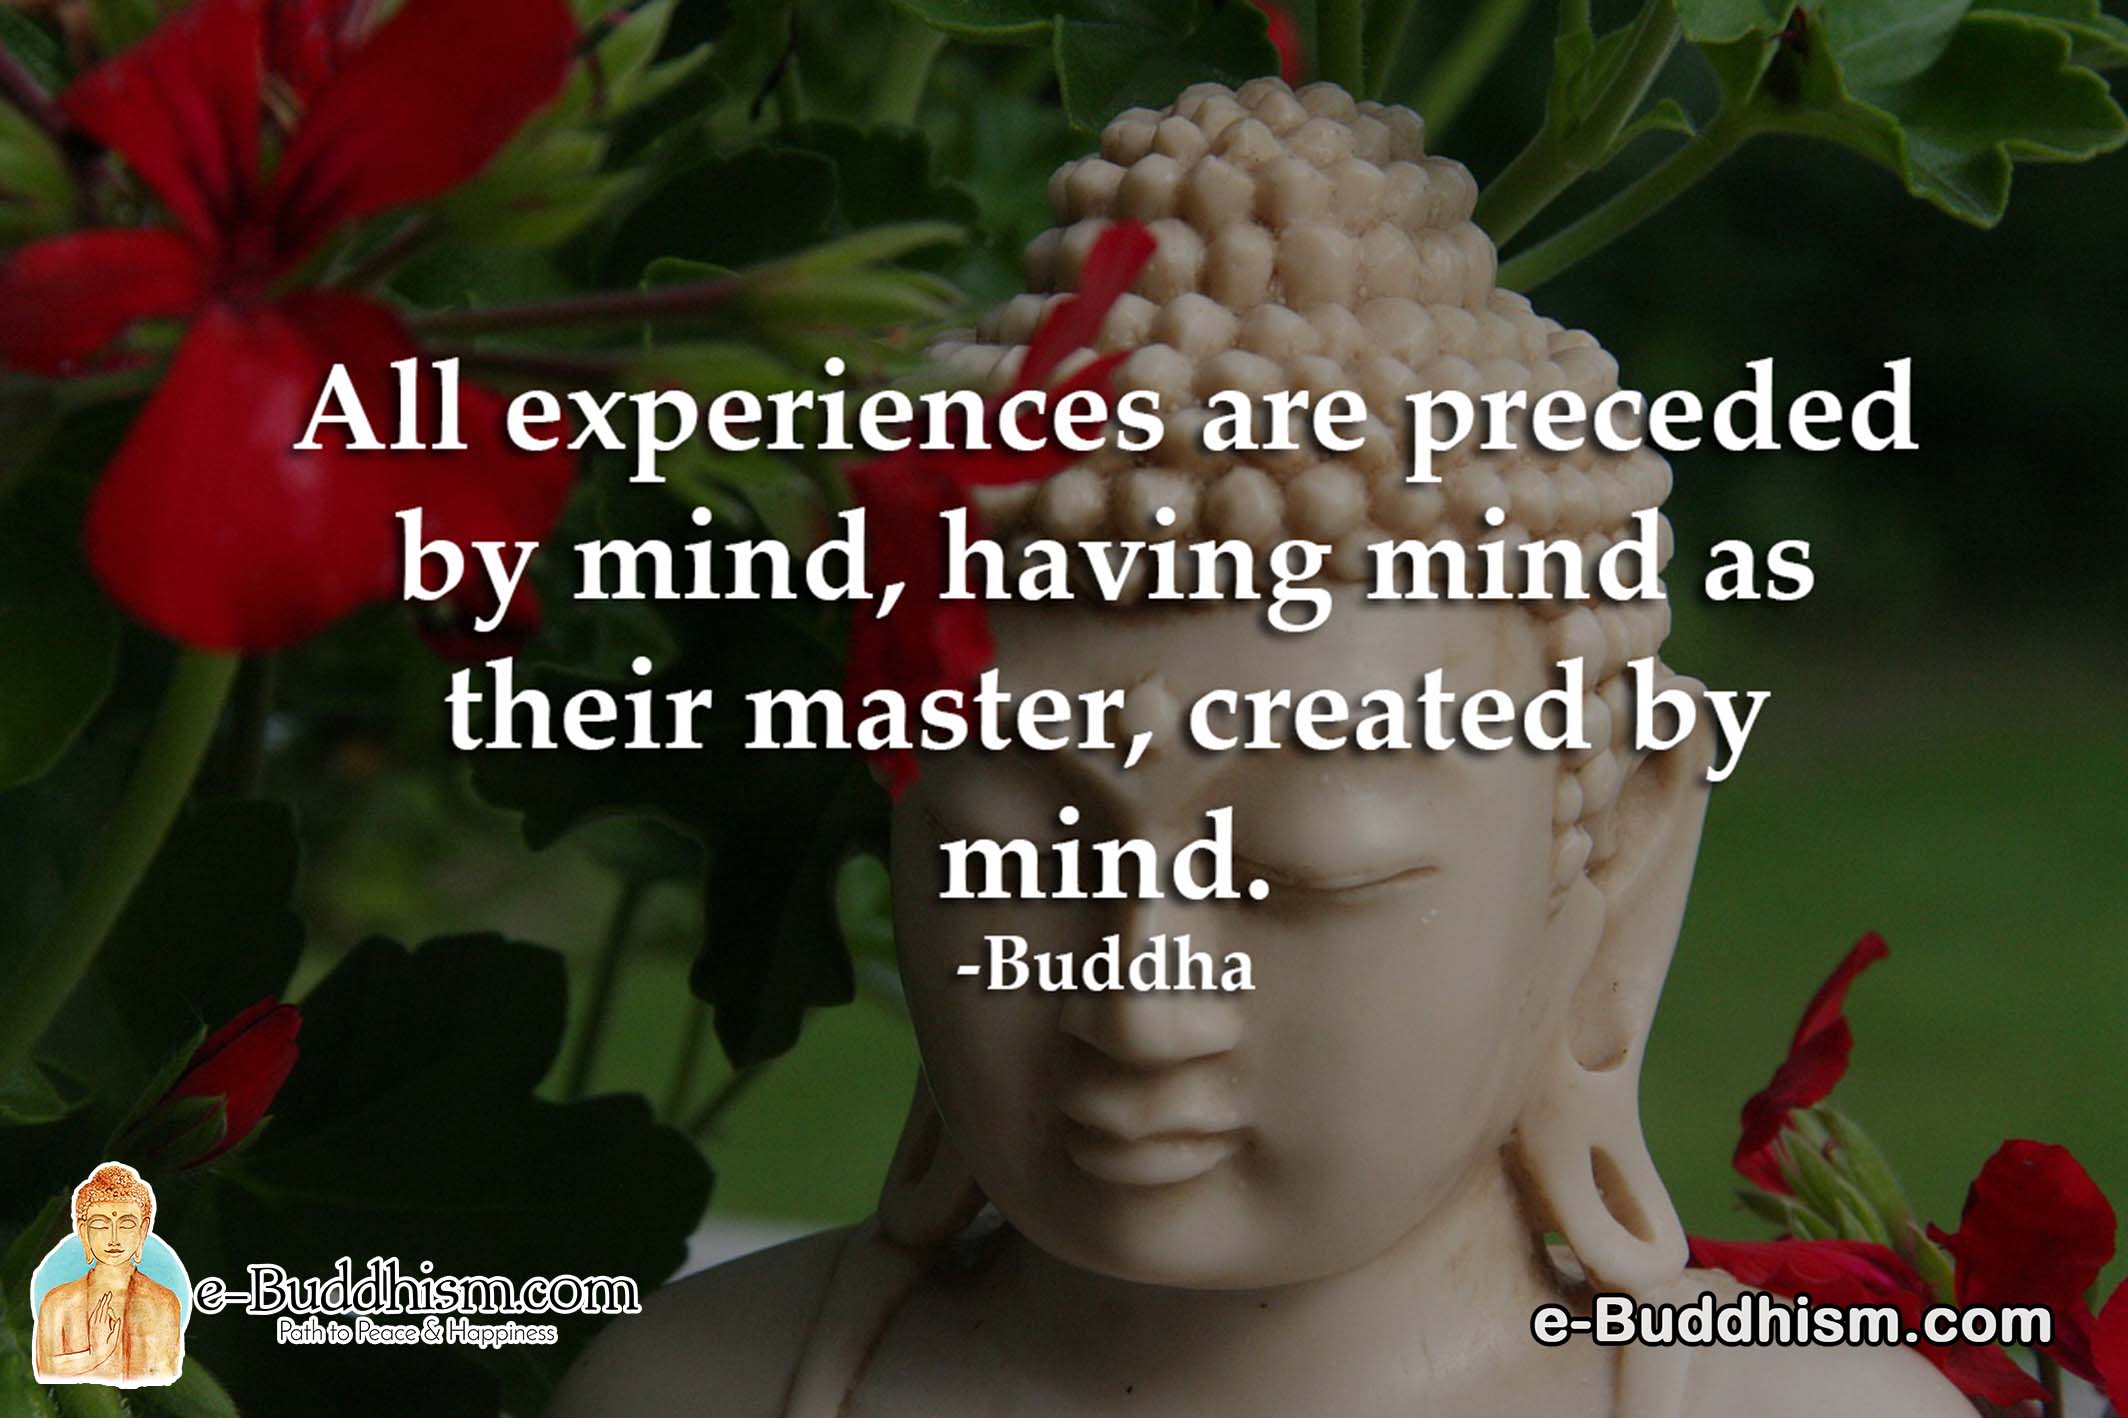 All experiences are preceded by minds, having the mind as their master, created by the mind. -Buddha